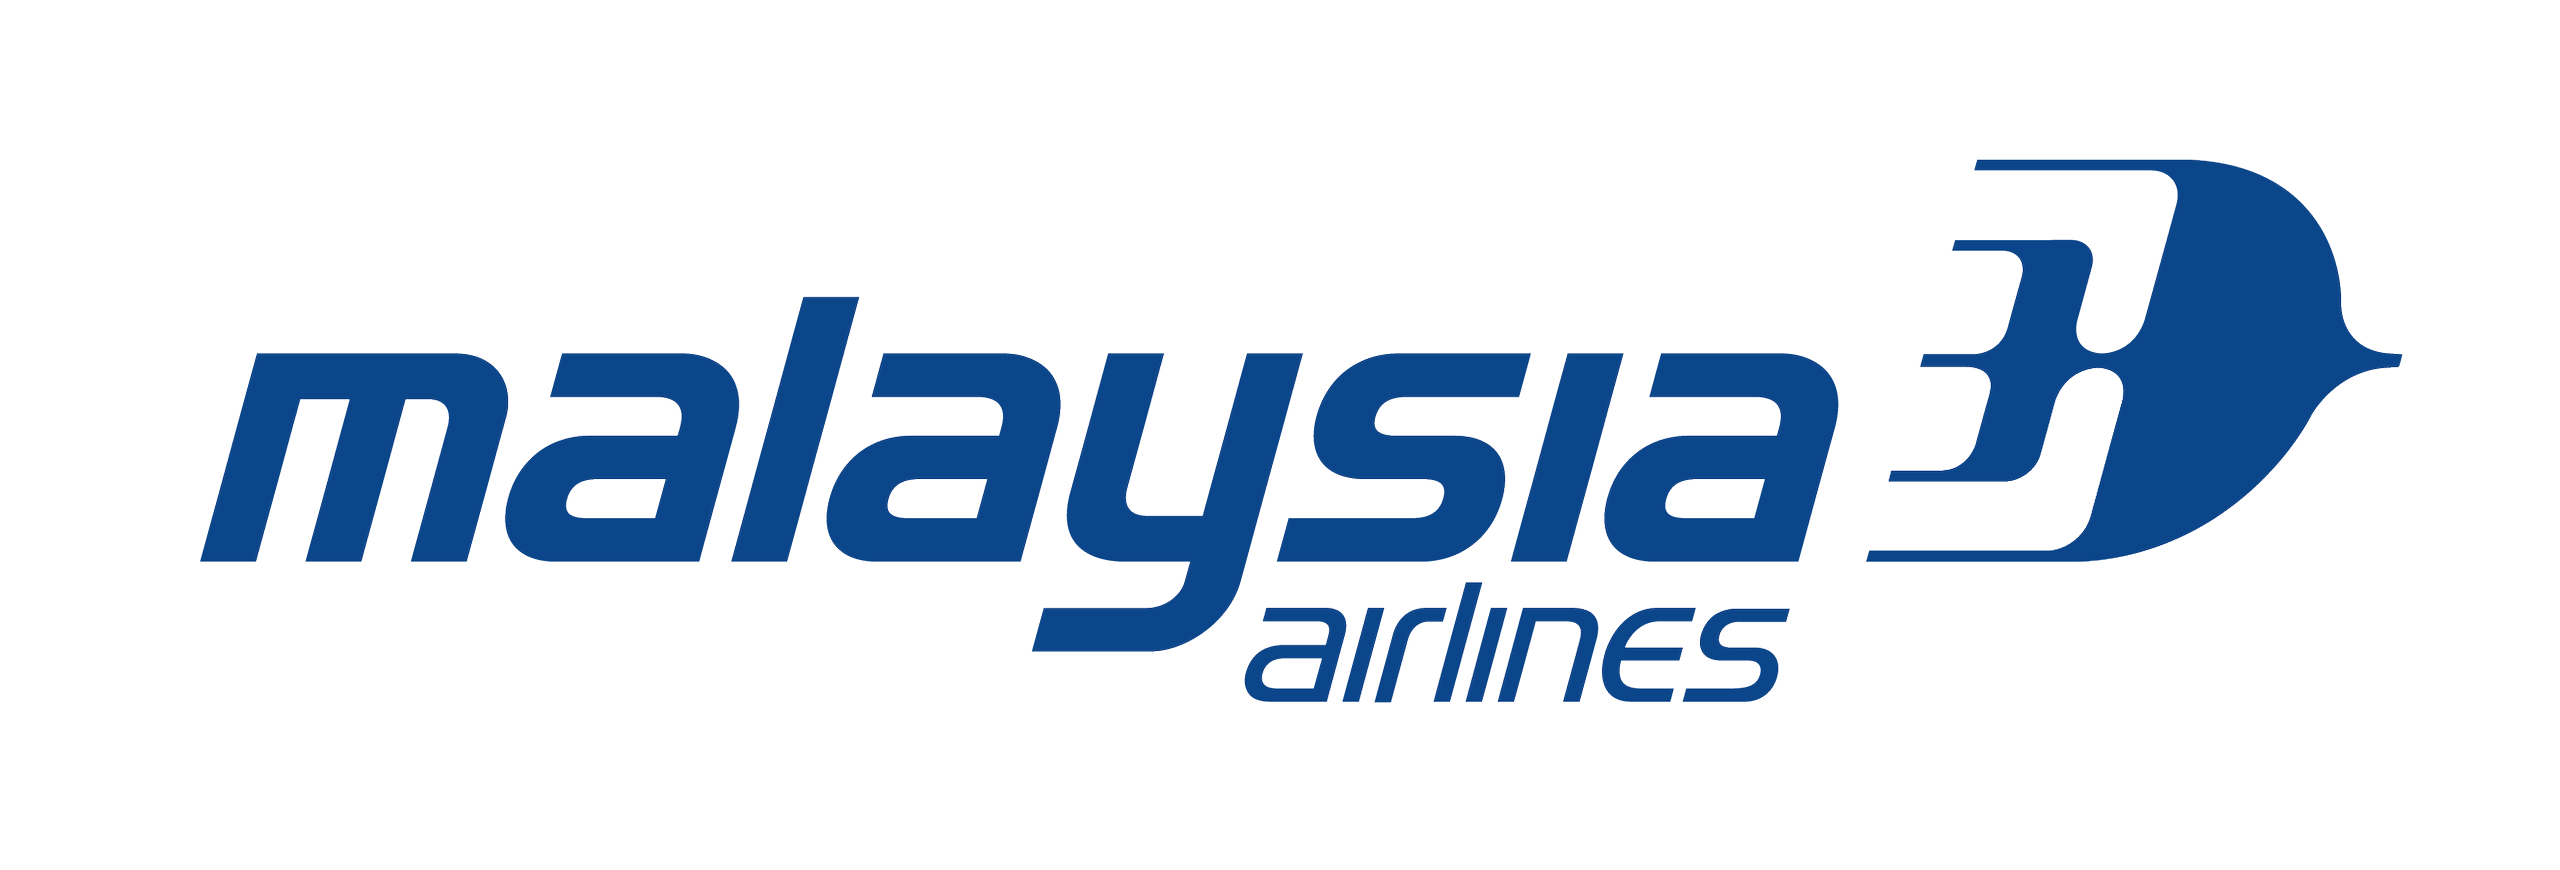 Malaysia Airlines 